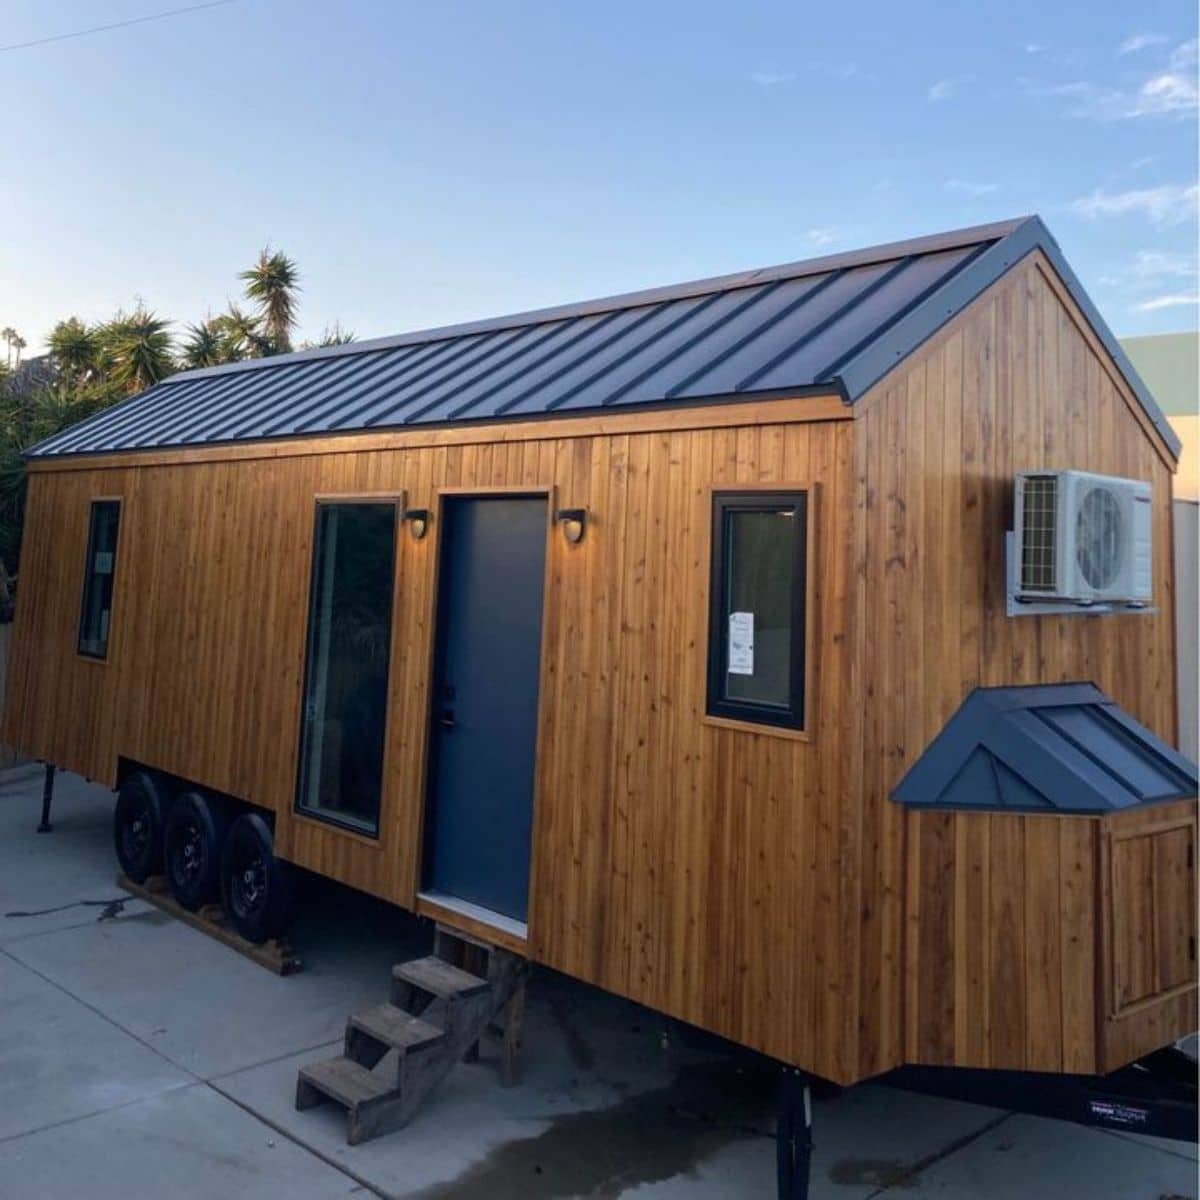 30′ Durable Tiny Home Can Withstand Anything You Throw at It!